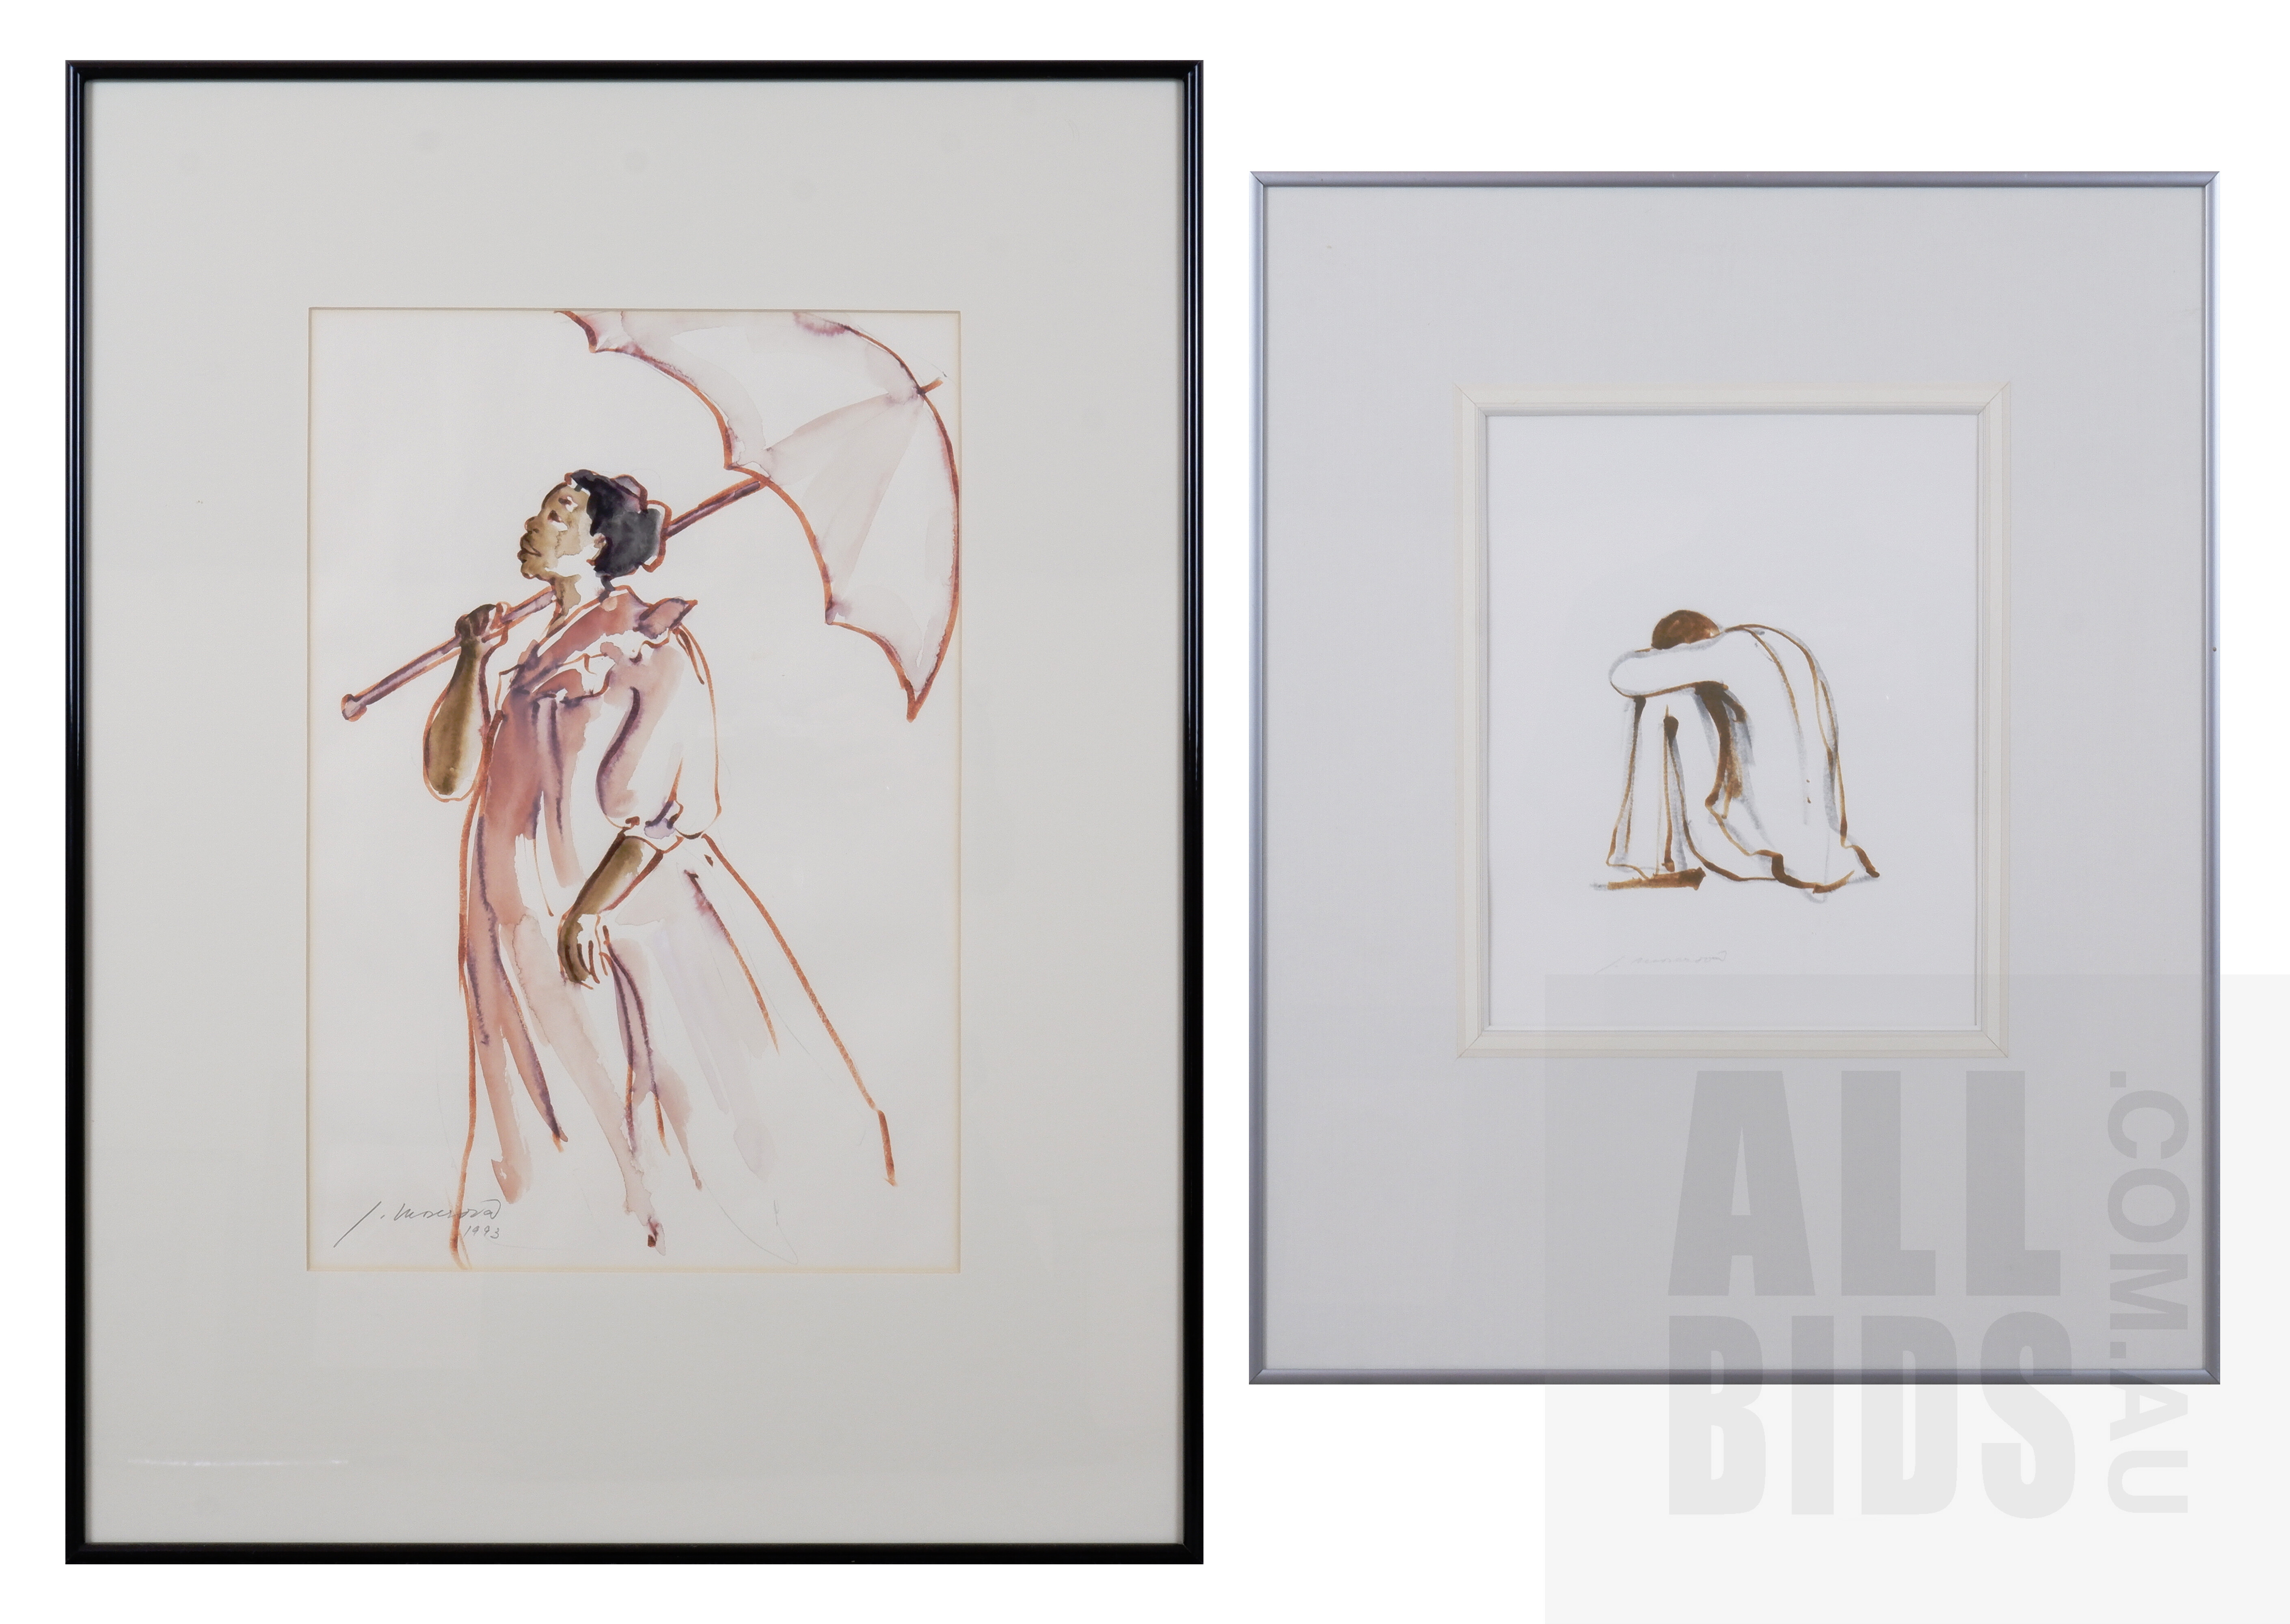 'Jara David Moserova (20th Century), Woman with Parasol 1993, Watercolour 40 x 27 cm together with Summer of Lost Hopes 1968, Watercolour, 25 x 20 cm (2)'